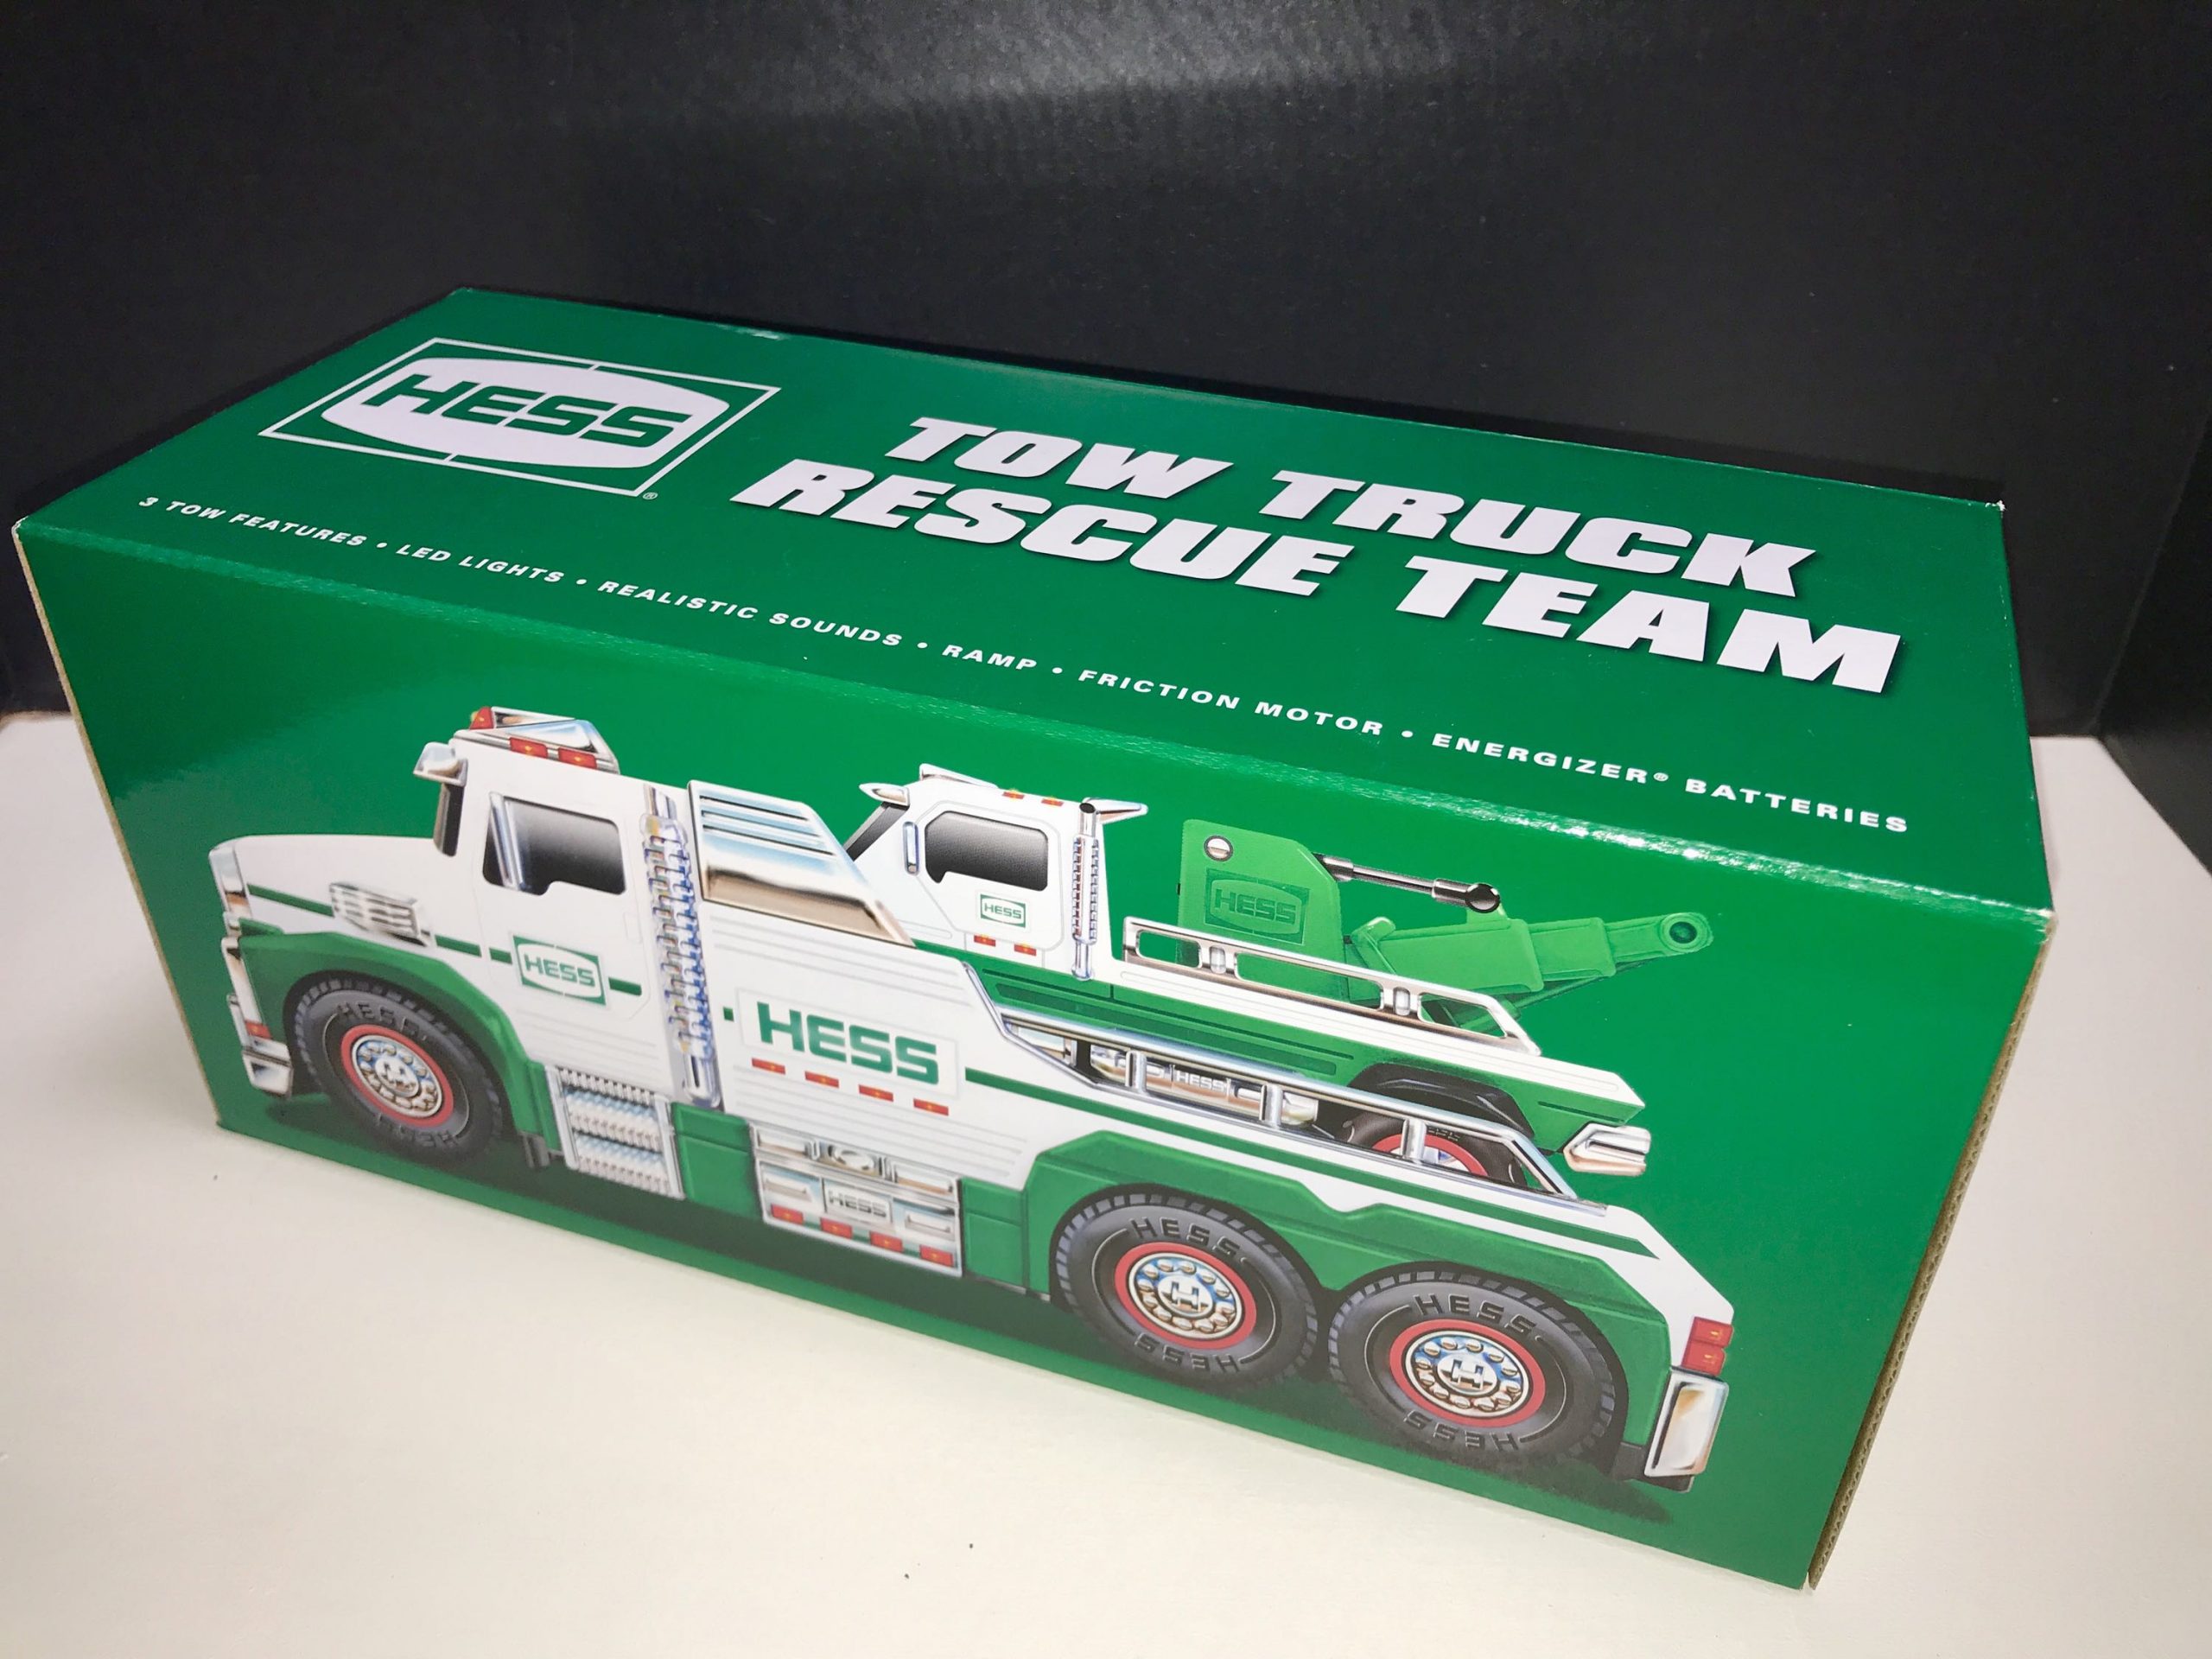 2019 Hess Toy Tow Truck Rescue Team Battery Included 